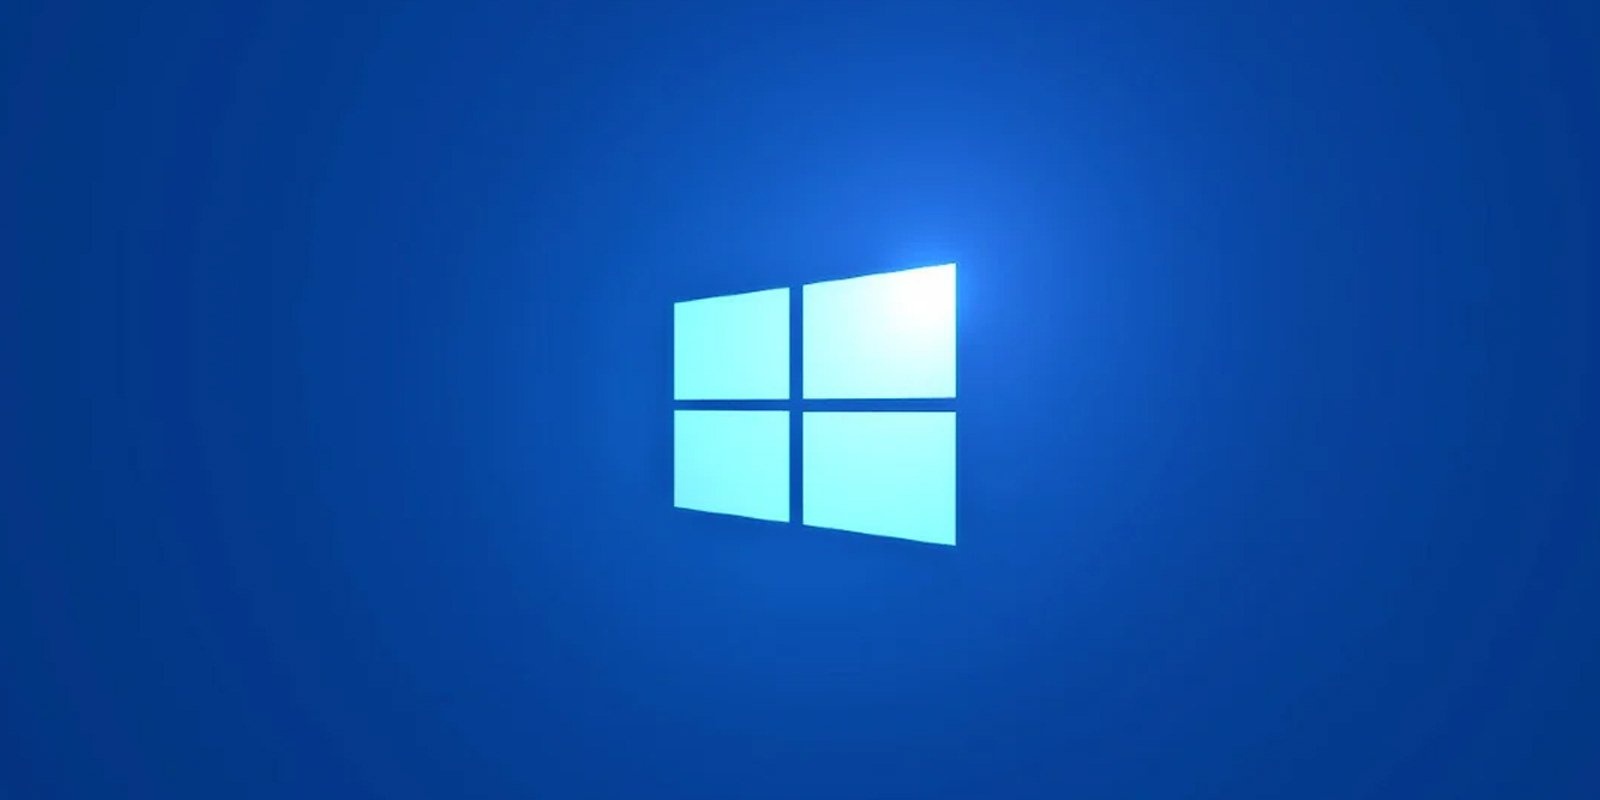 Can’t download Windows 10 21H2? Here’s how to get it